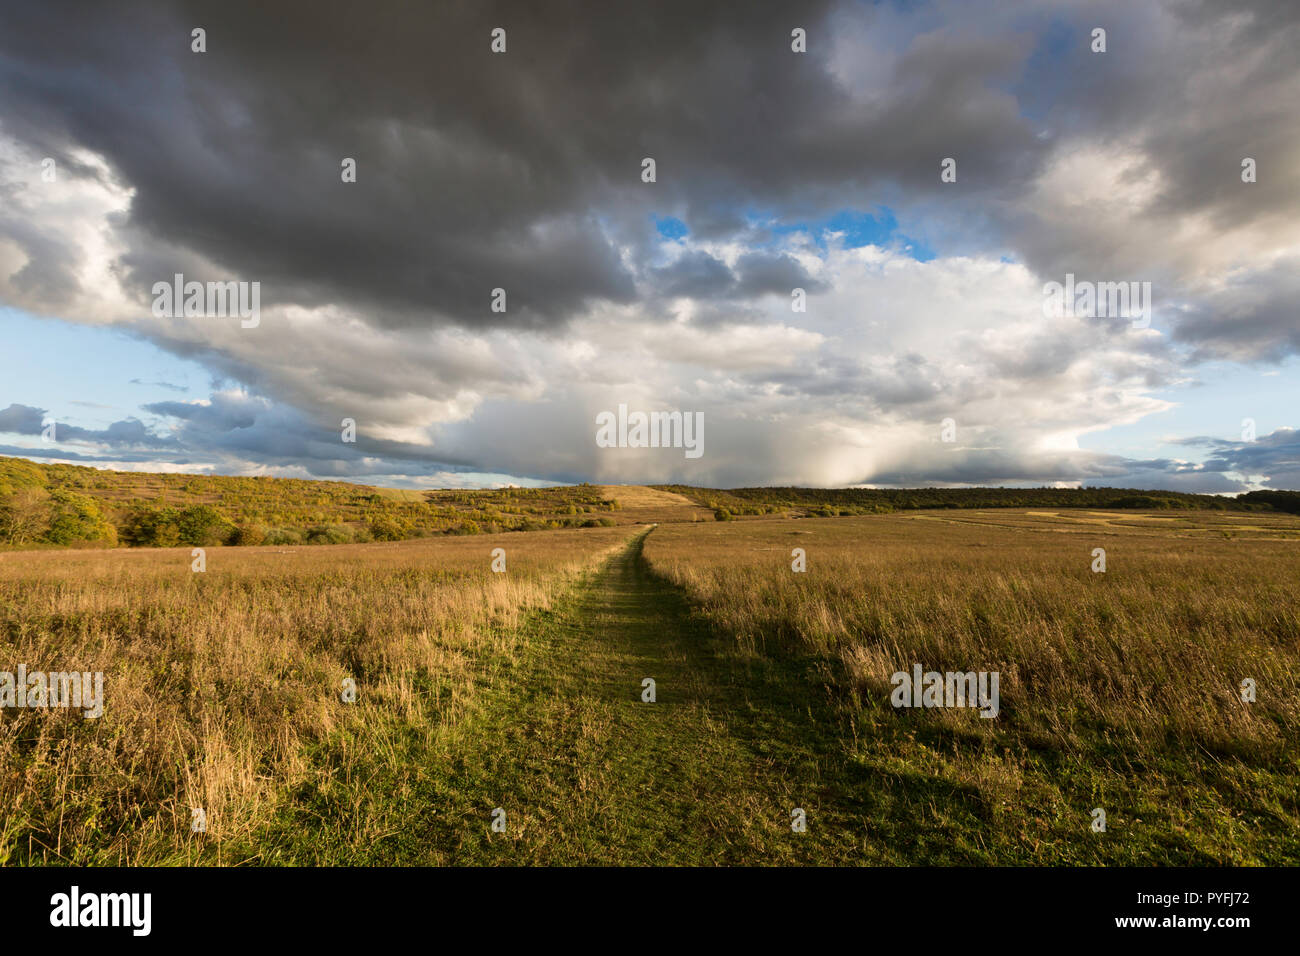 Bright pre-sunset light and dramatic clouds over Victory Wood, Yorkletts, Whitstable, Kent, UK. Stock Photo